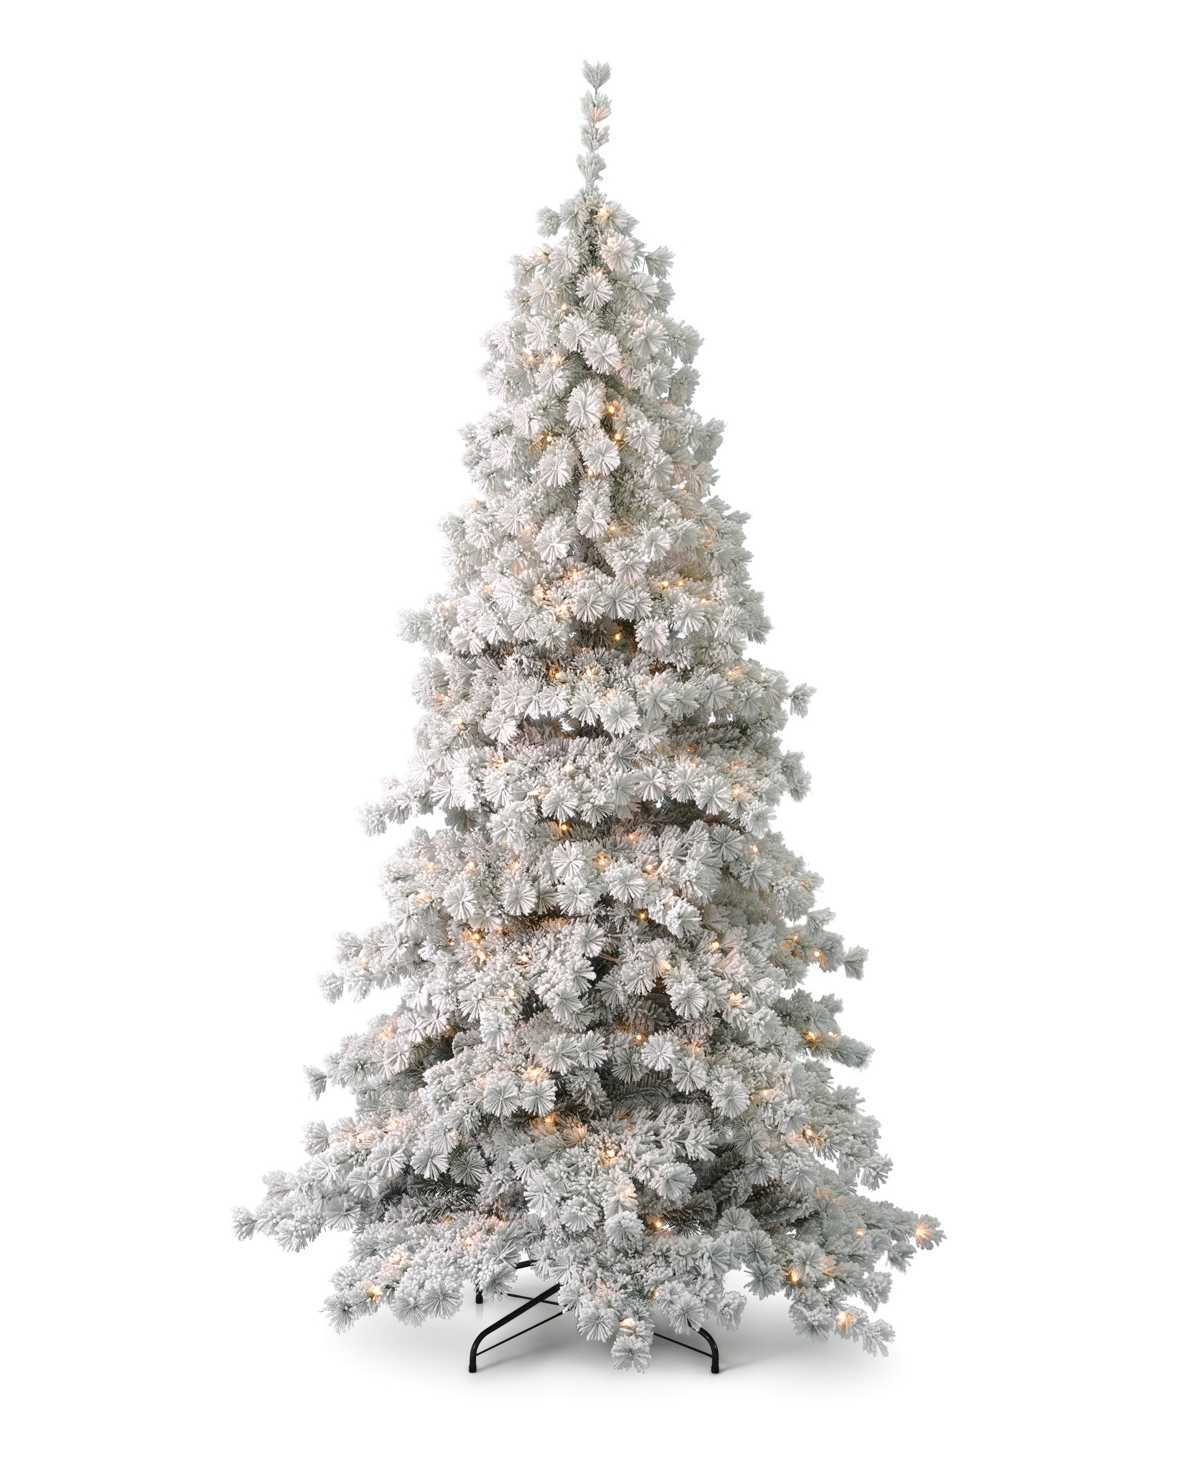 Flocked Winter Fir 7.5' Pre-Lit Flocked Hard Needle Tree with Metal Stand 735 Tips, 300 Warm Led Remote, Ez-Connect, Storage Bag - White